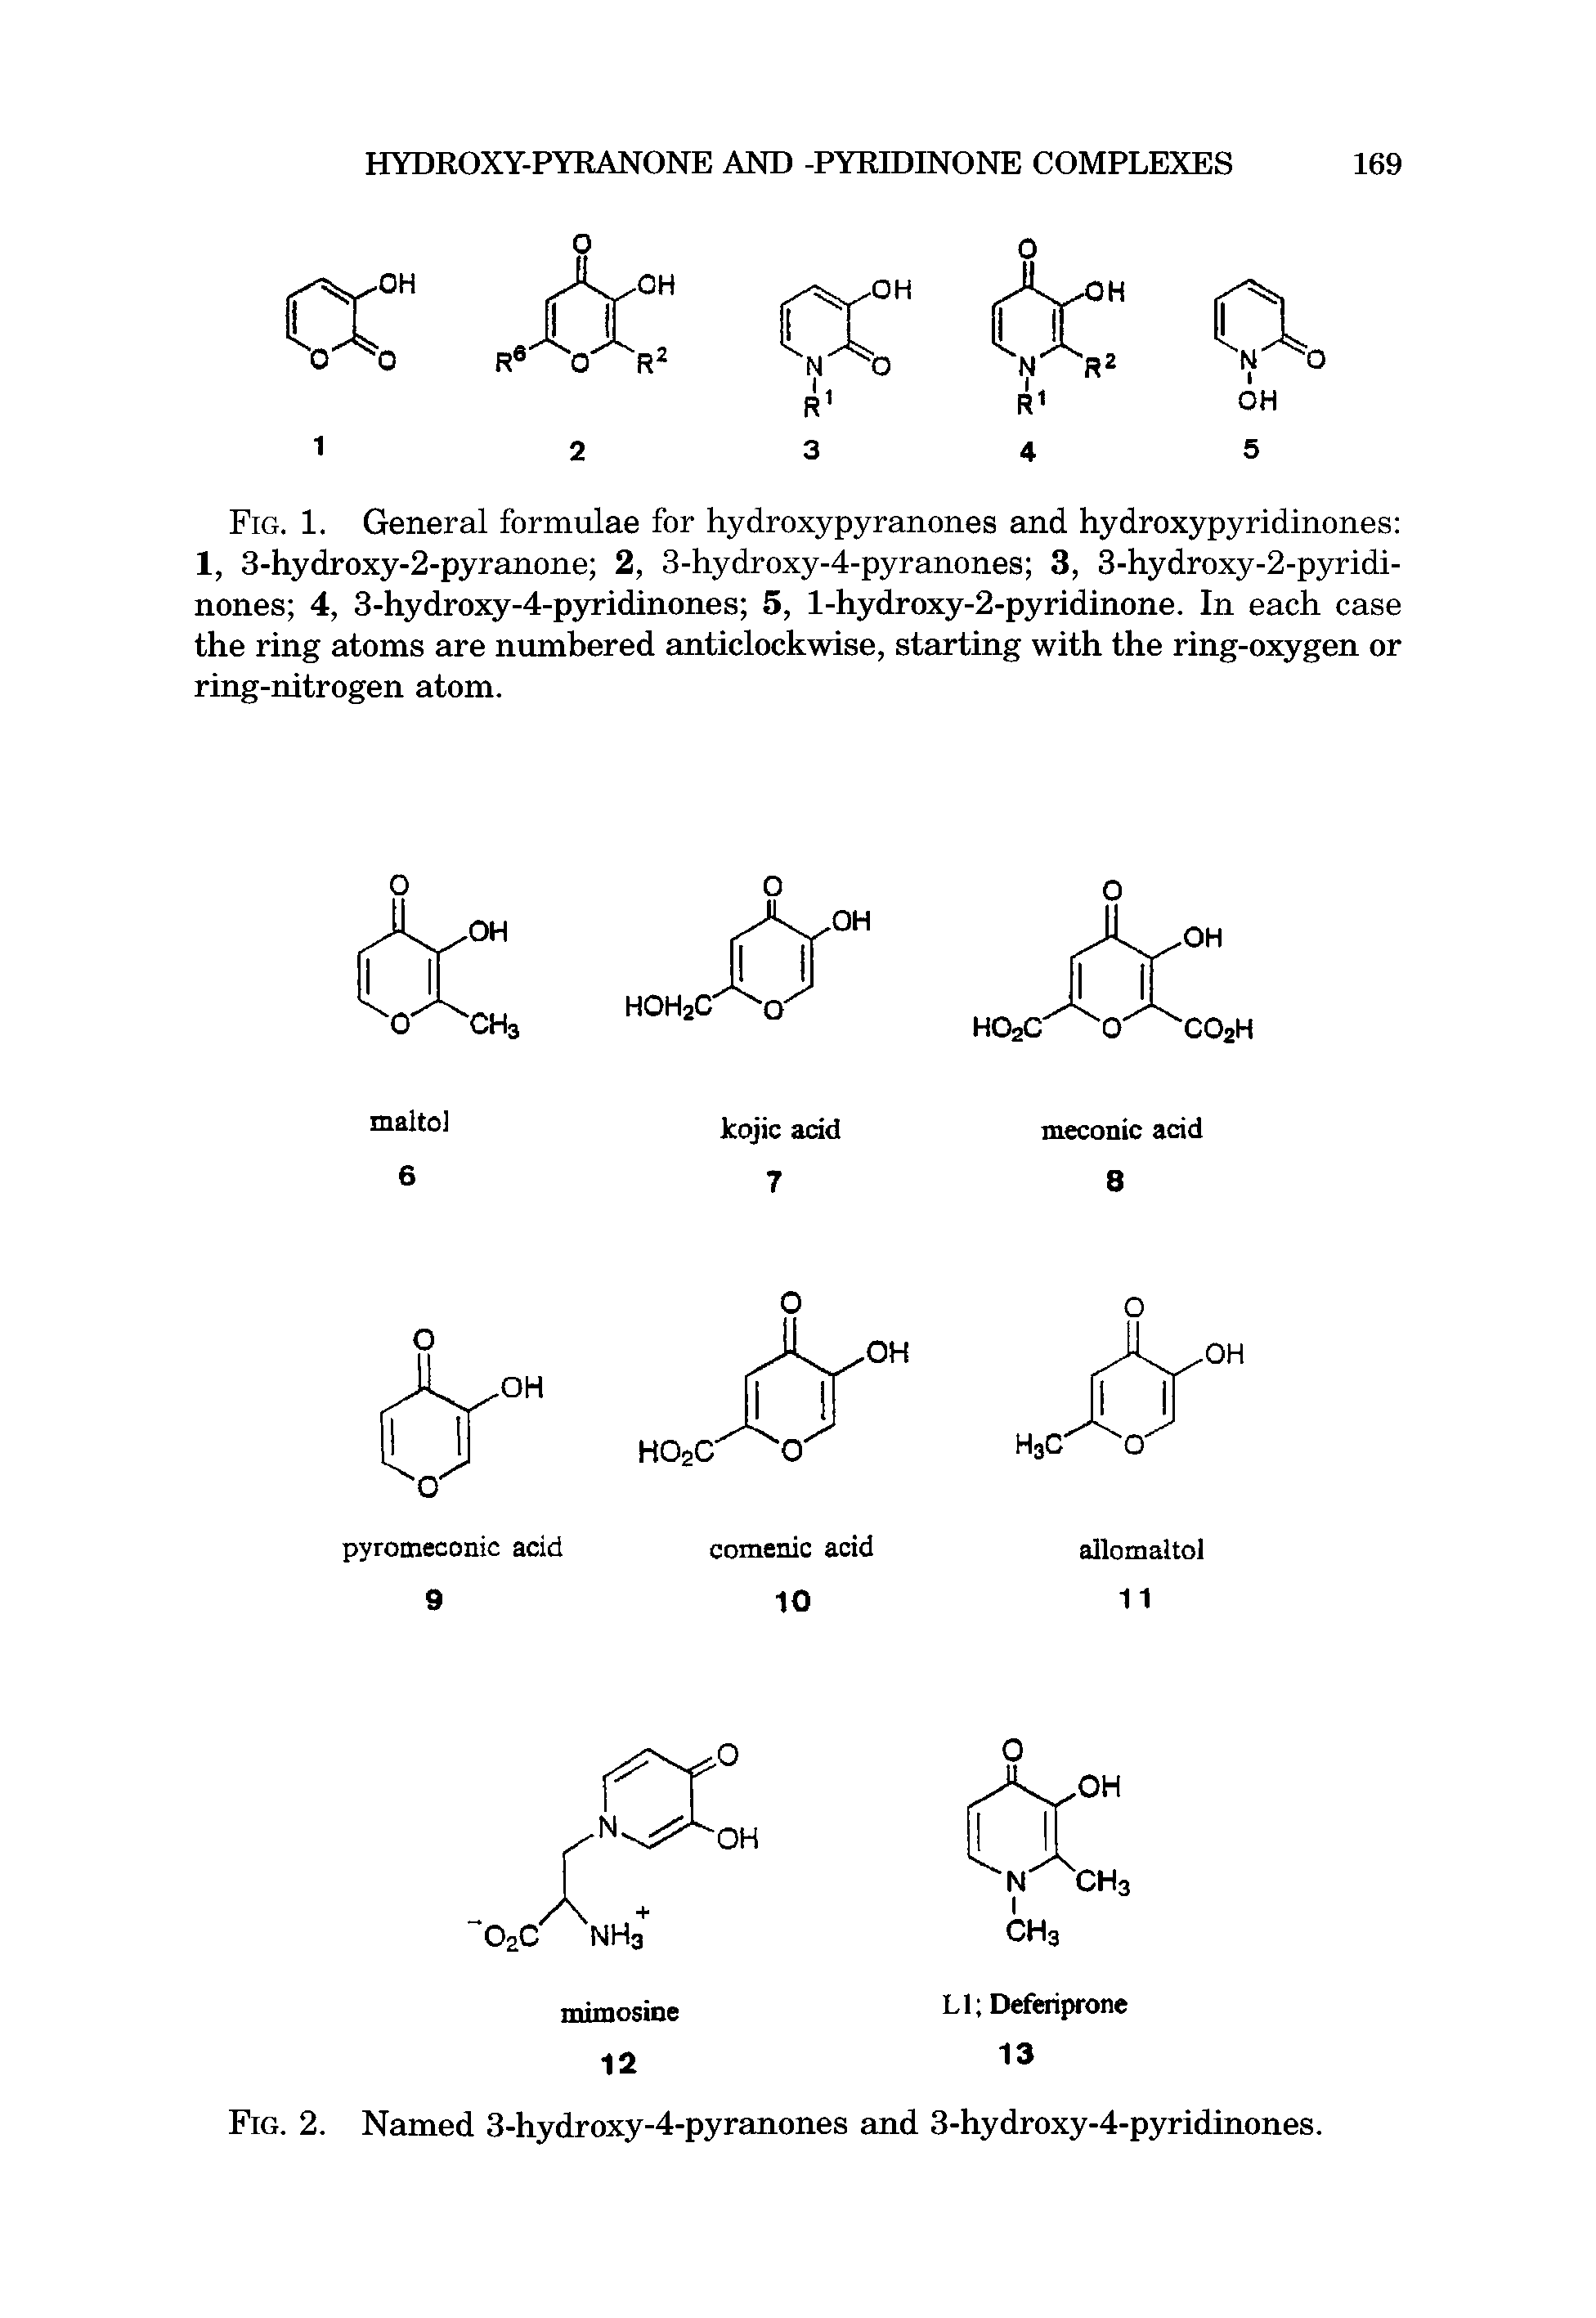 Fig. 1. General formulae for hydroxypyranones and hydroxypyridinones 1, 3-hydroxy-2-pyranone 2, 3-hydroxy-4-pyranones 3, 3-hydroxy-2-pyridi-nones 4, 3-hydroxy-4-pyridinones 5, l-hydroxy-2-pyridinone. In each case the ring atoms are numbered anticlockwise, starting with the ring-oxygen or ring-nitrogen atom.